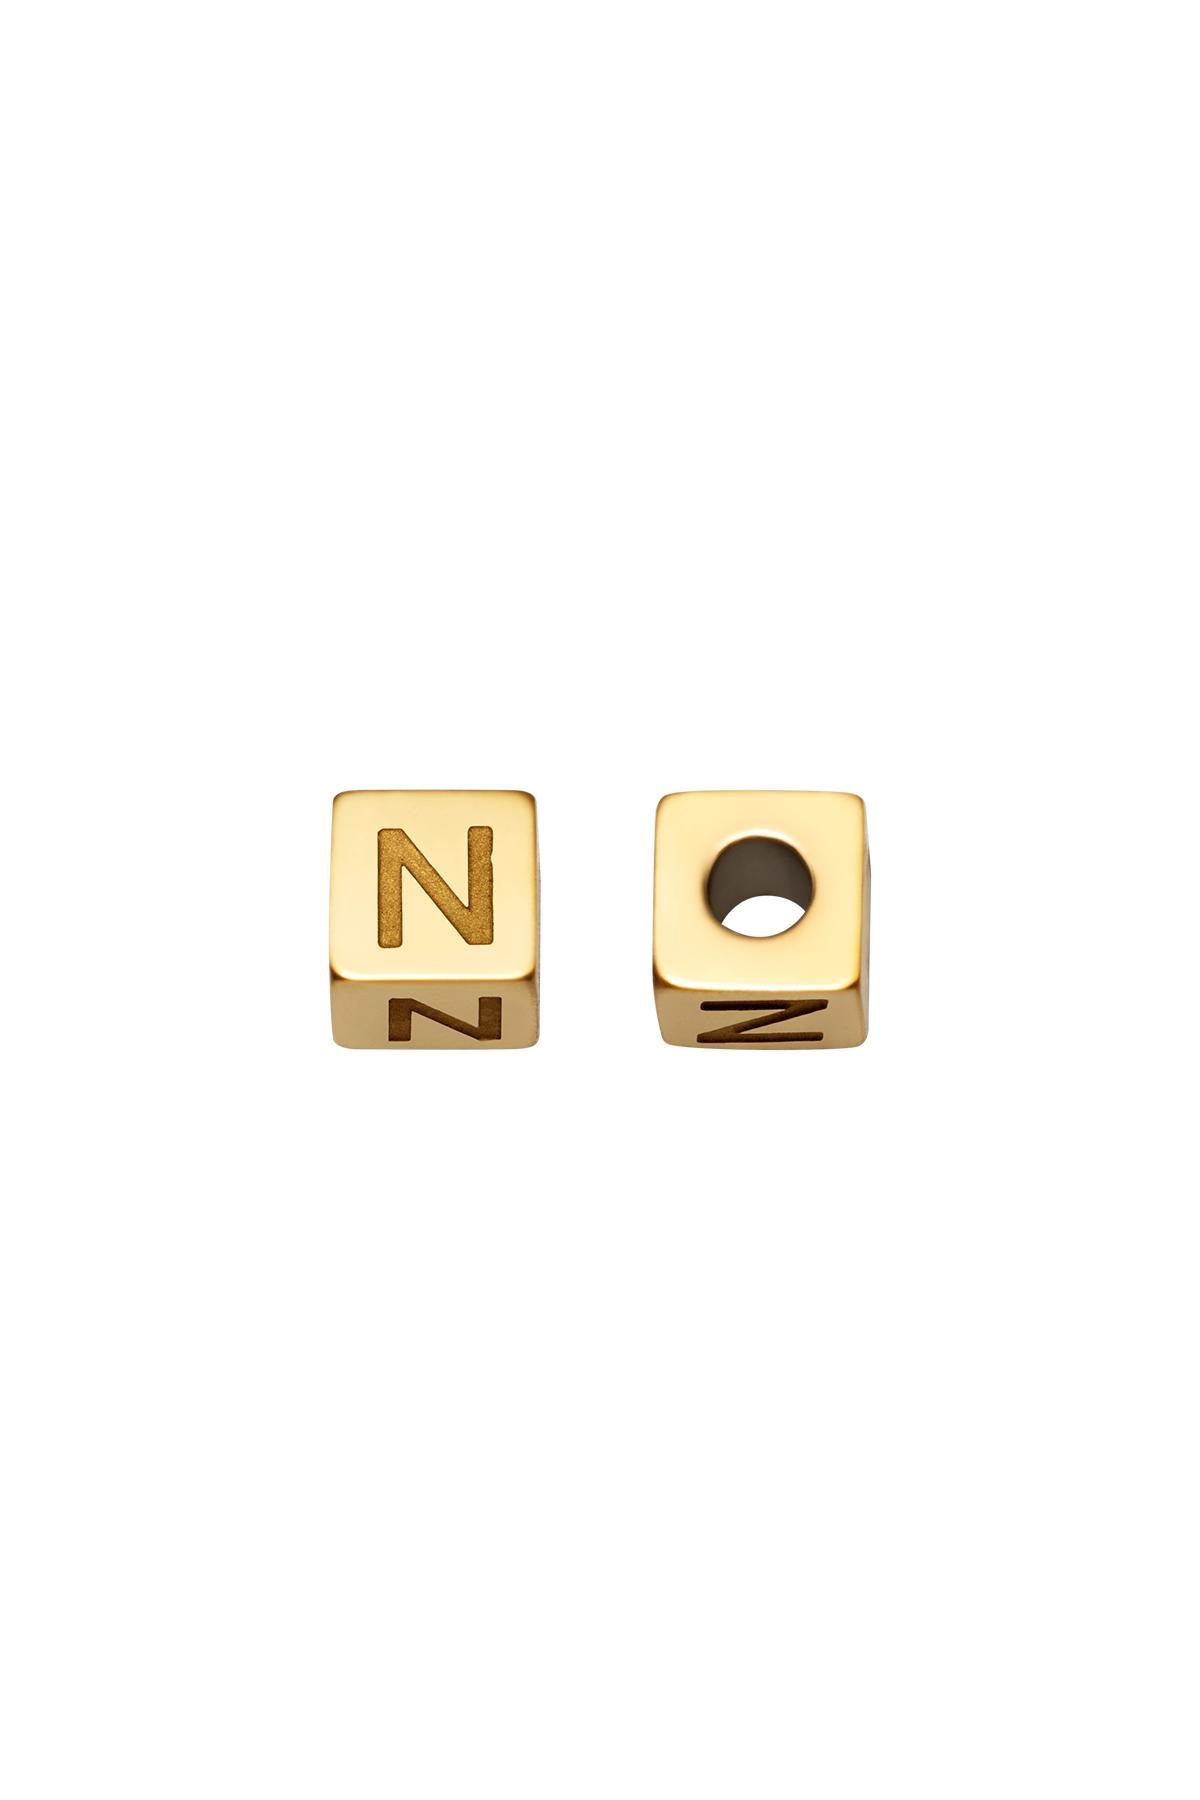 Gold / DIY Beads Alphabet Gold N Stainless Steel Picture7